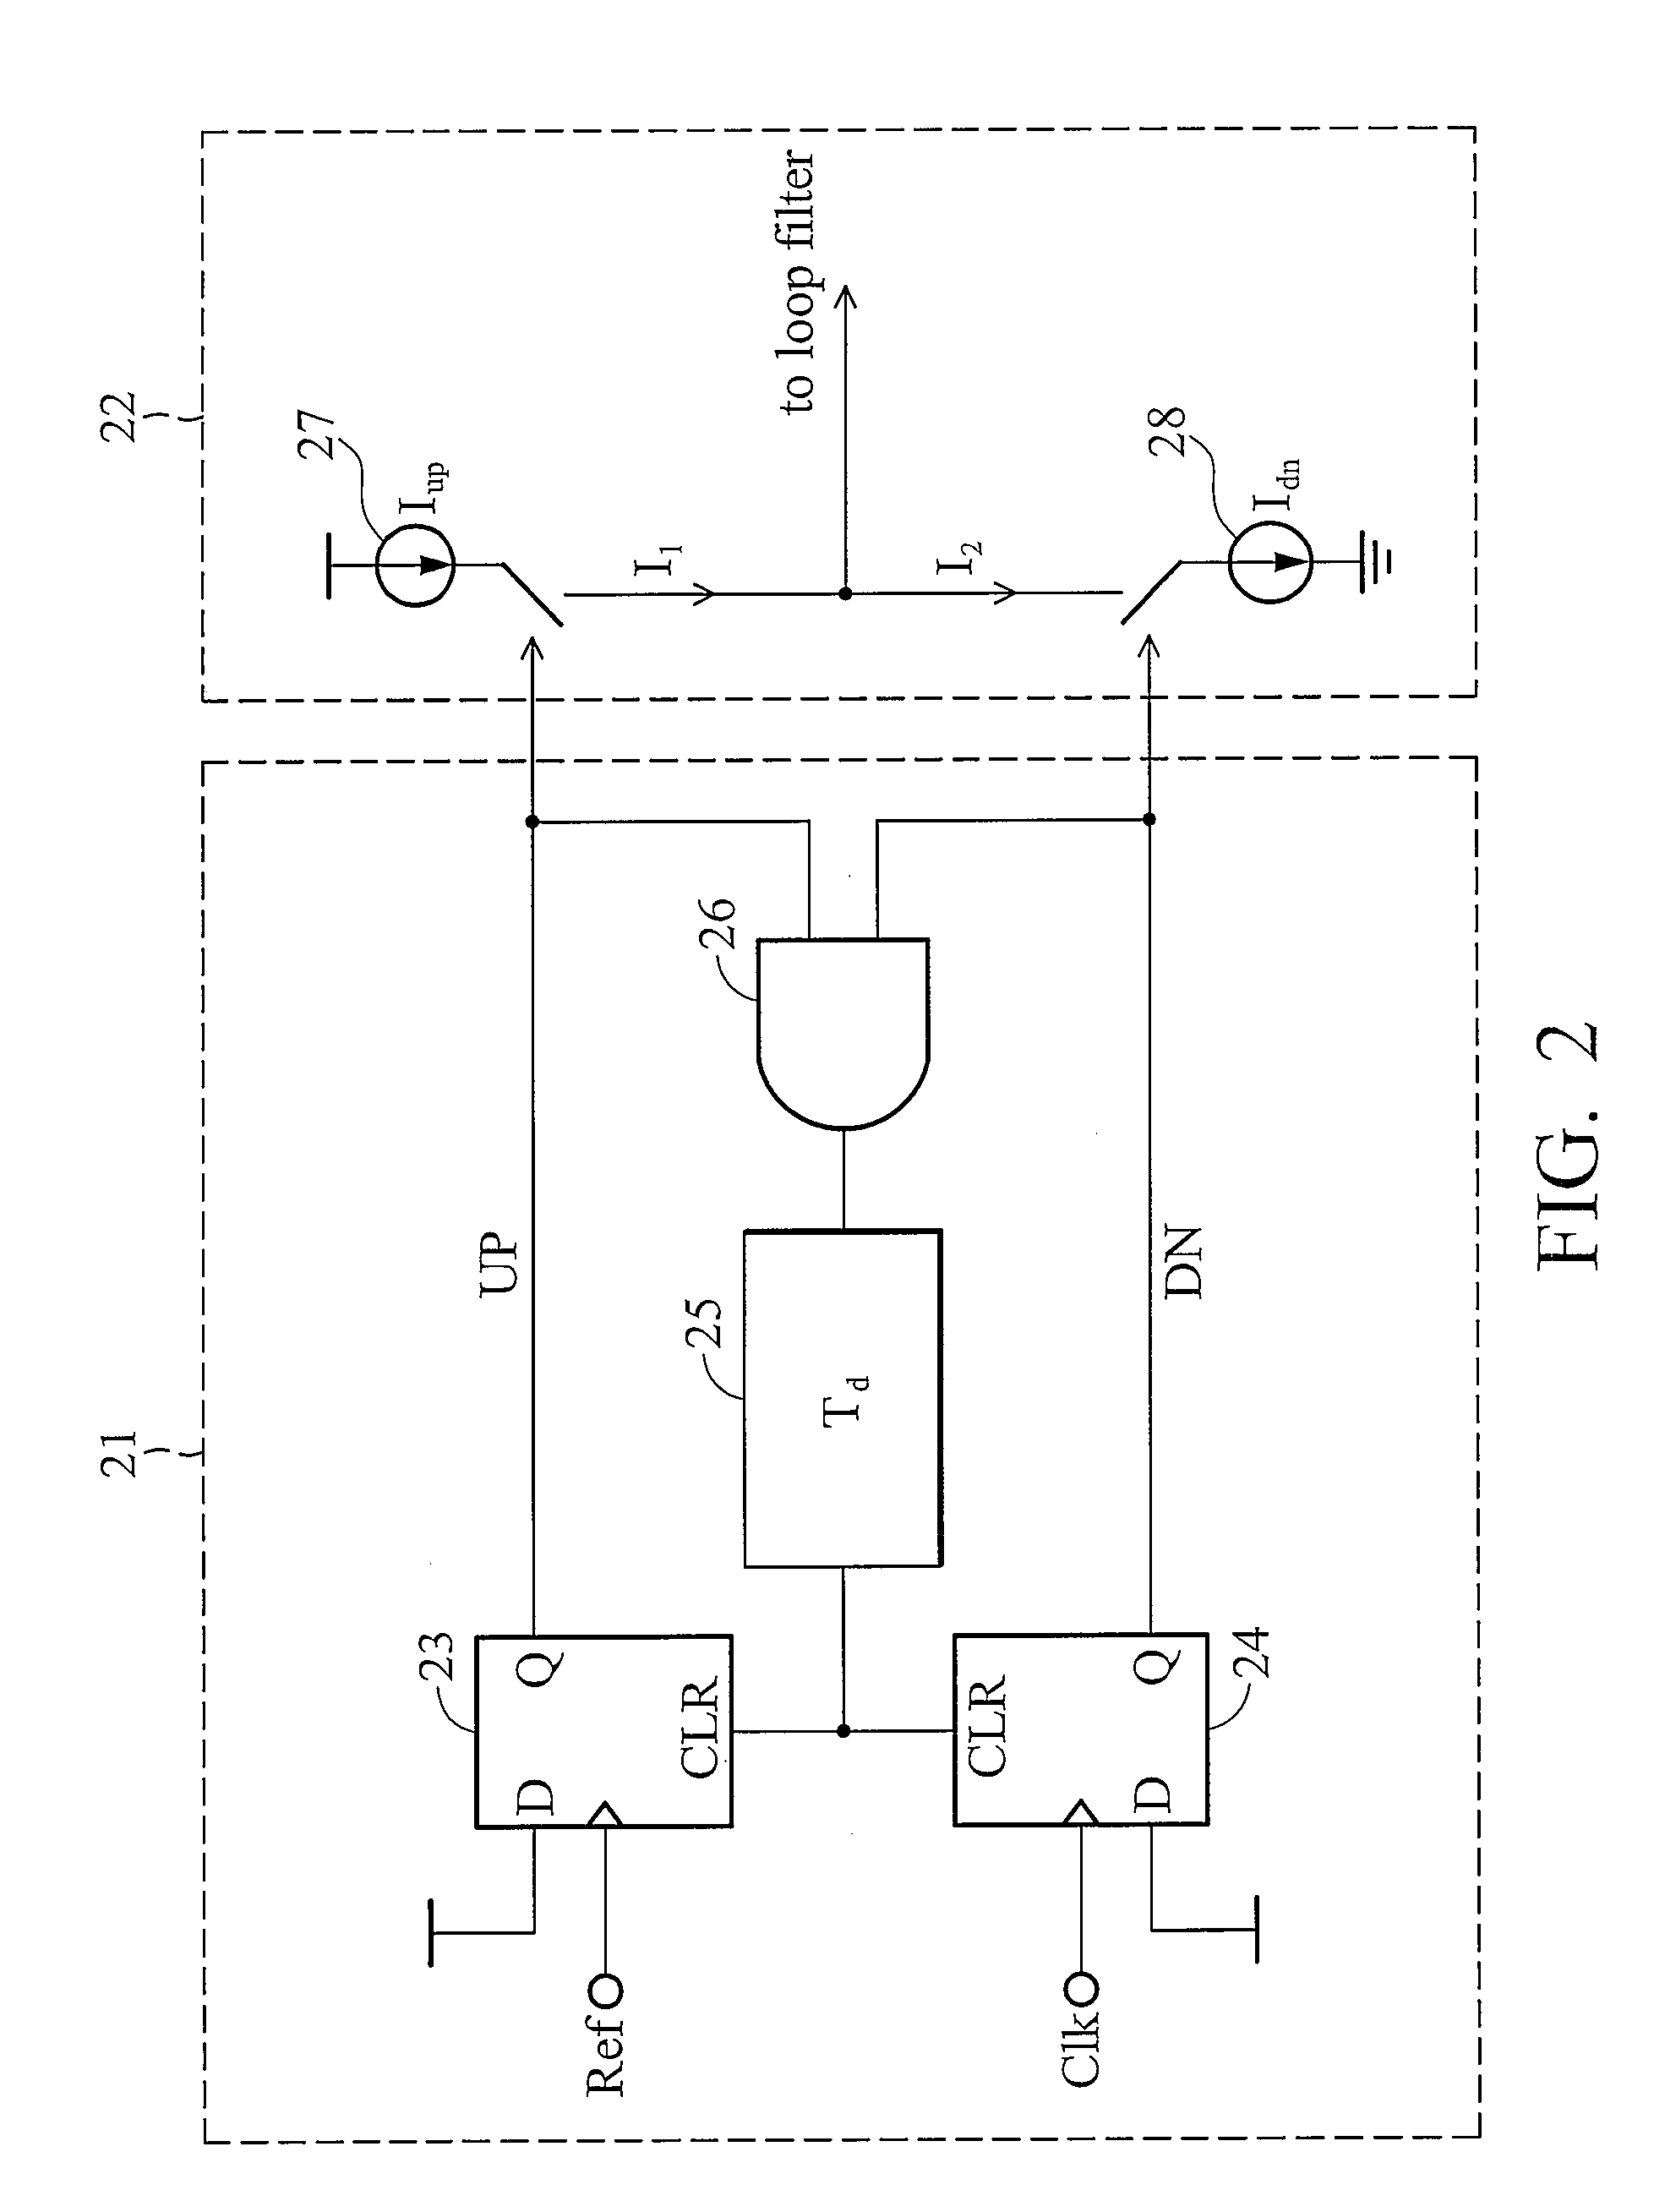 Phase frequency detector and phase-locked loop